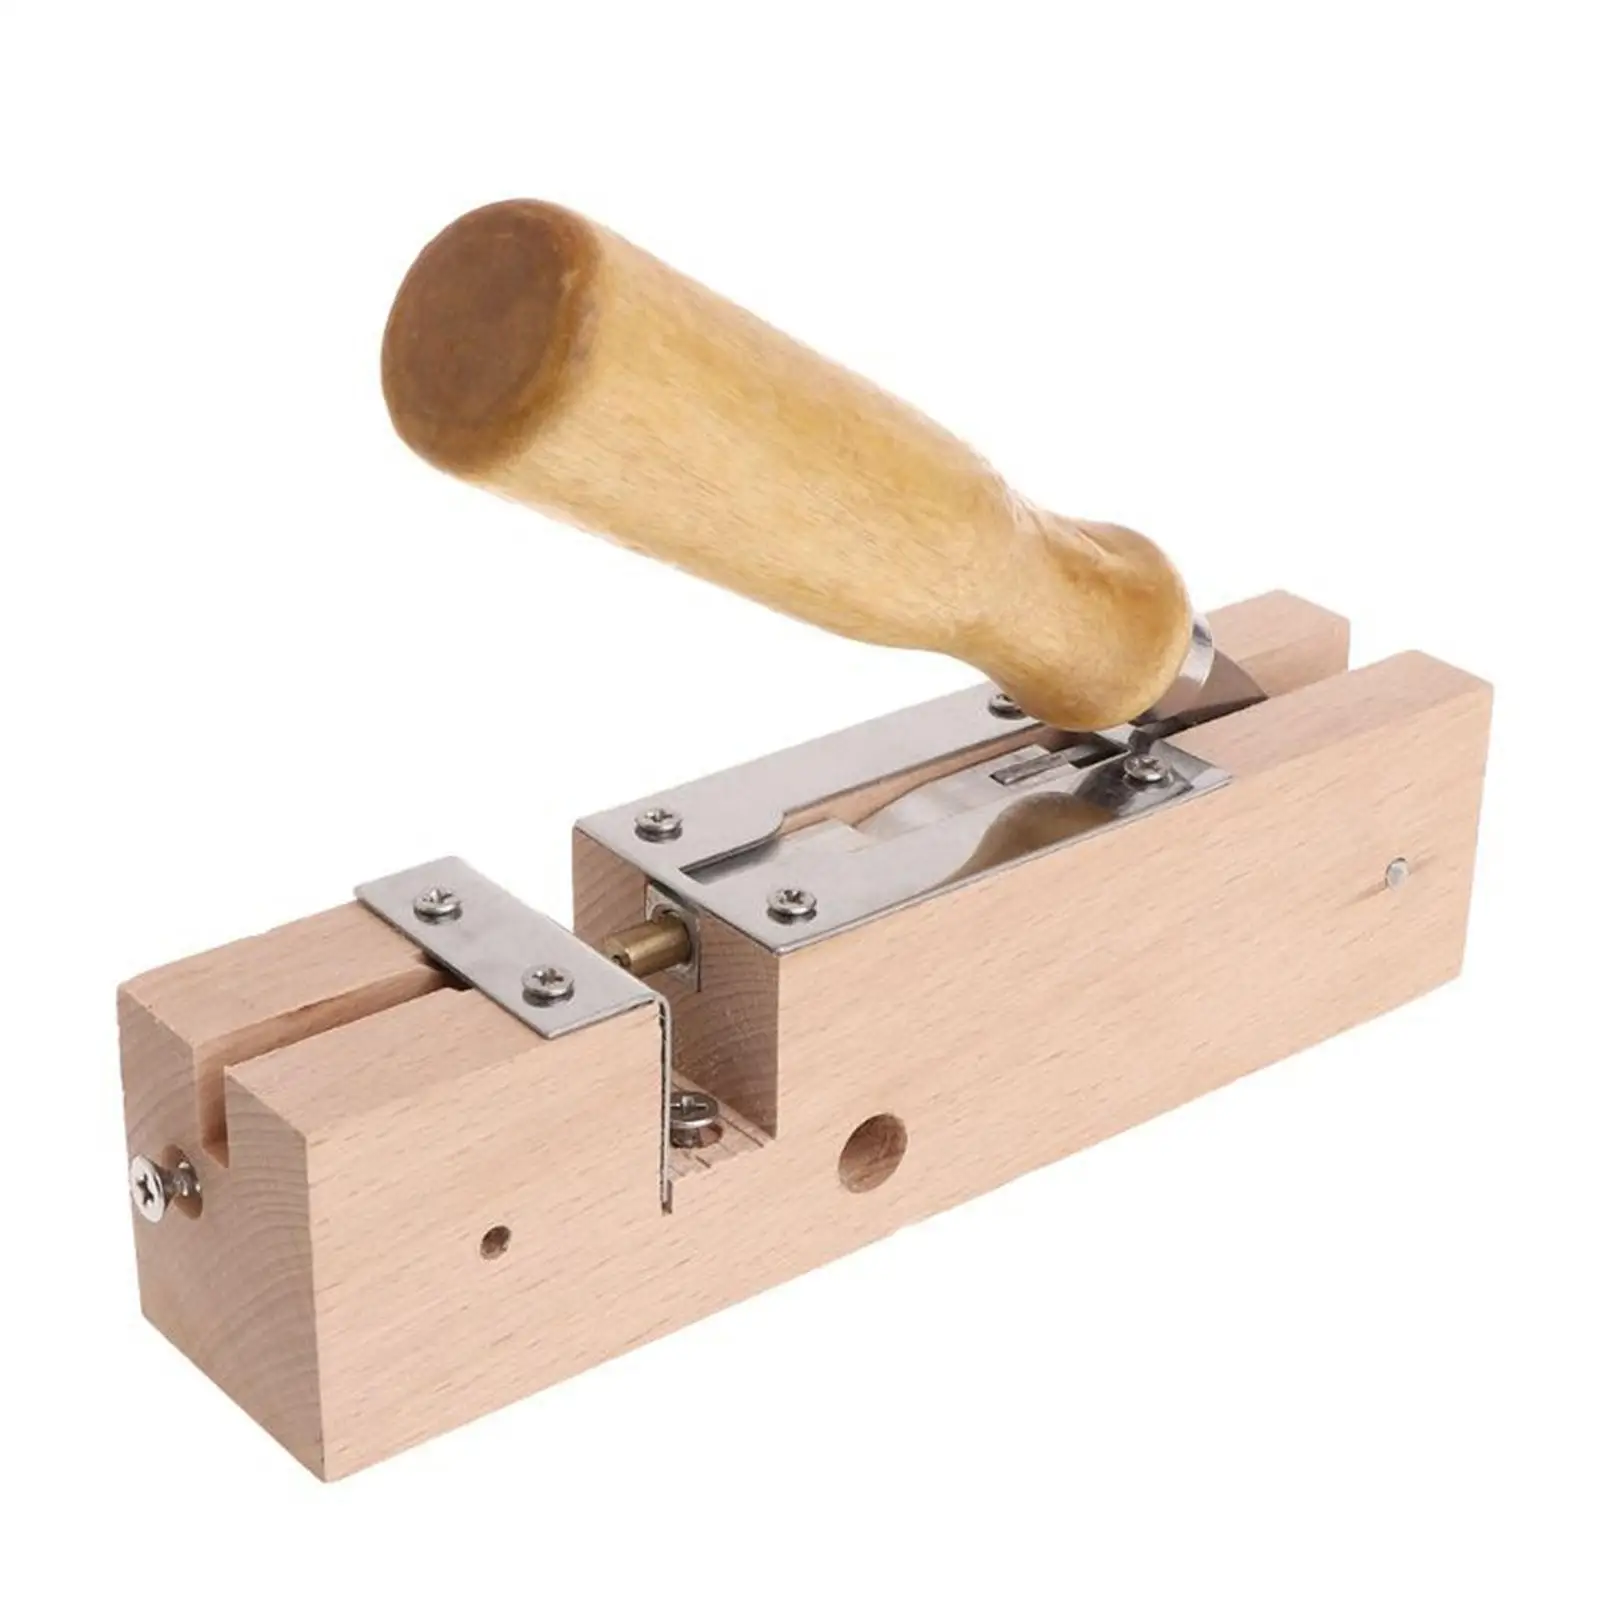 Beehive Hole Puncher Hand Tool Hole Puncher Kits Portable Eyelet Plier Durable Wooden Heavy Duty Eyelets Puncher Frame Puncher